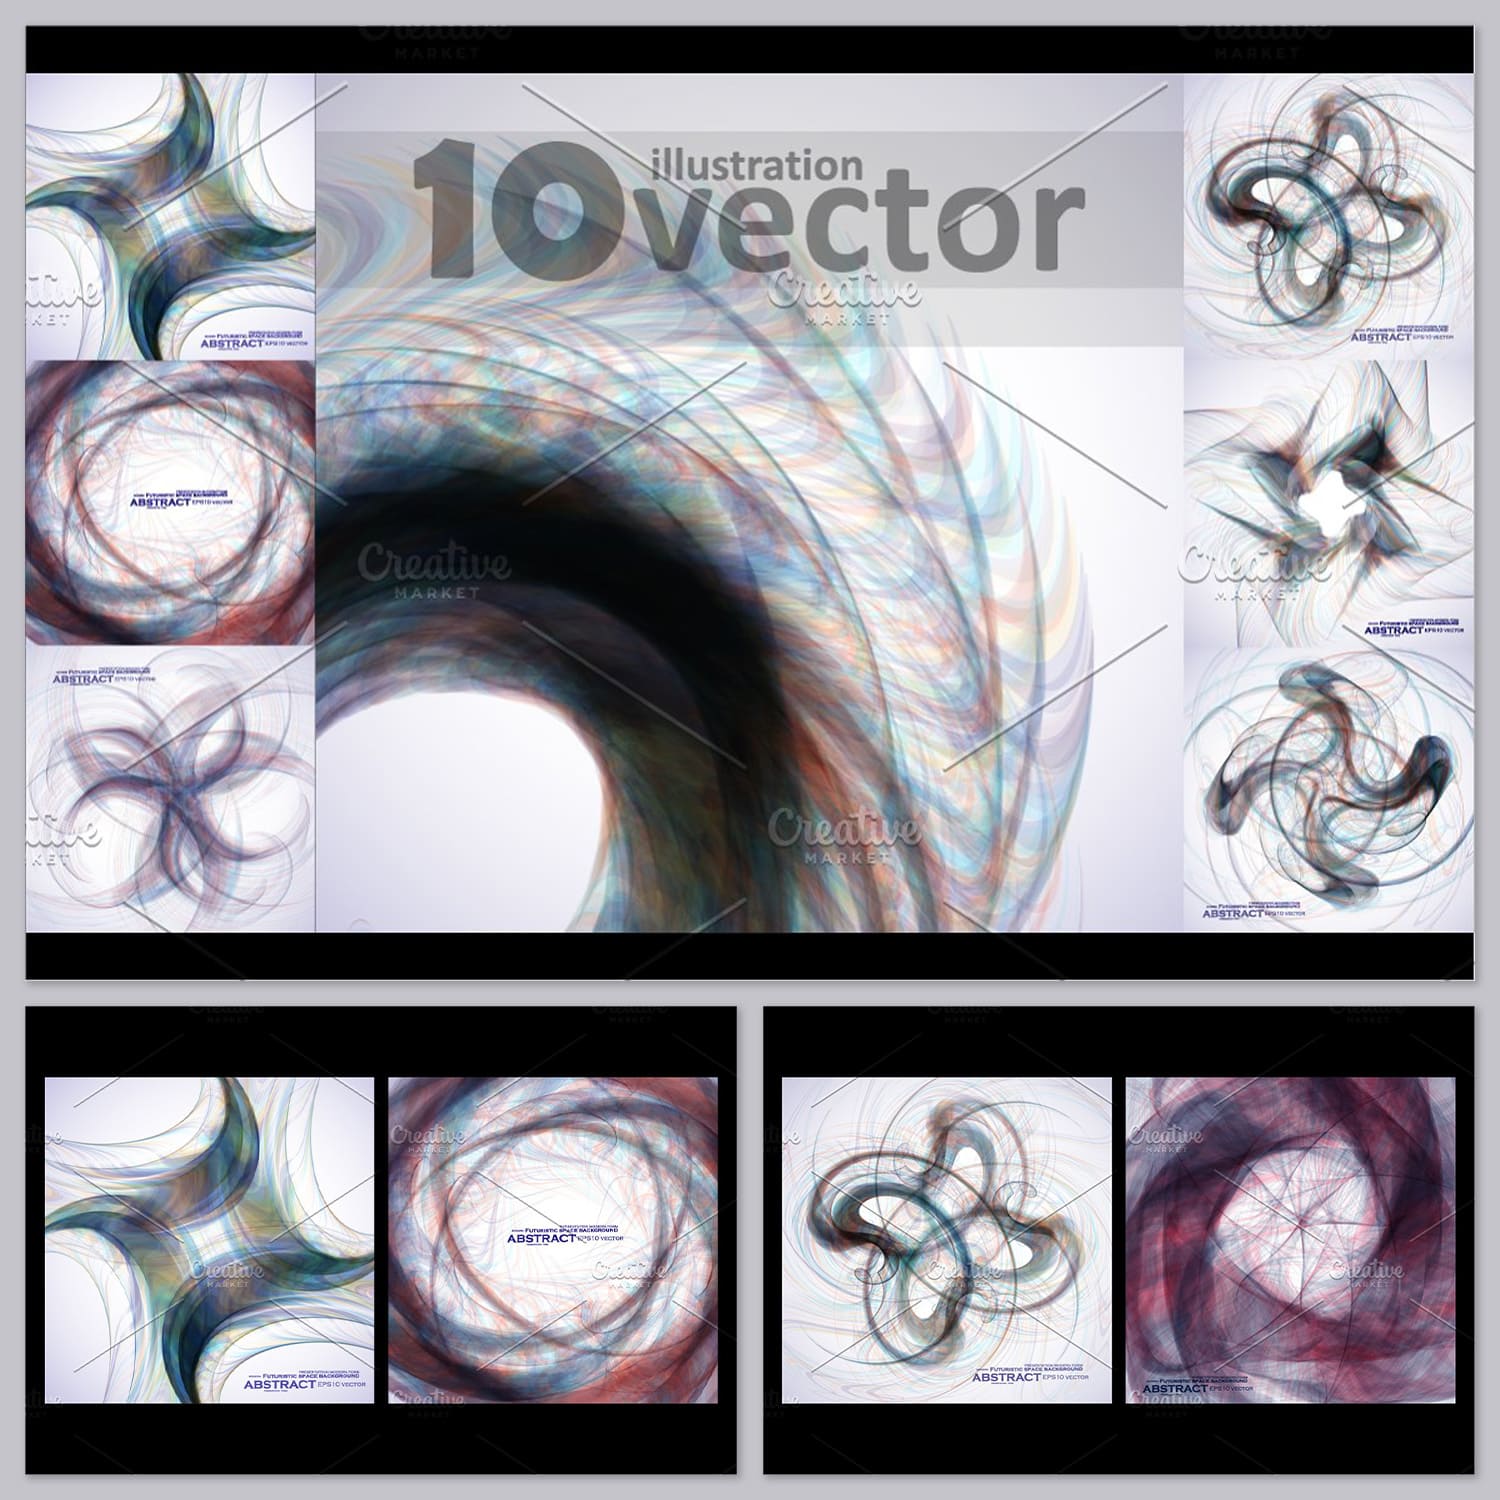 Abstract Fractal Backgrounds cover image.